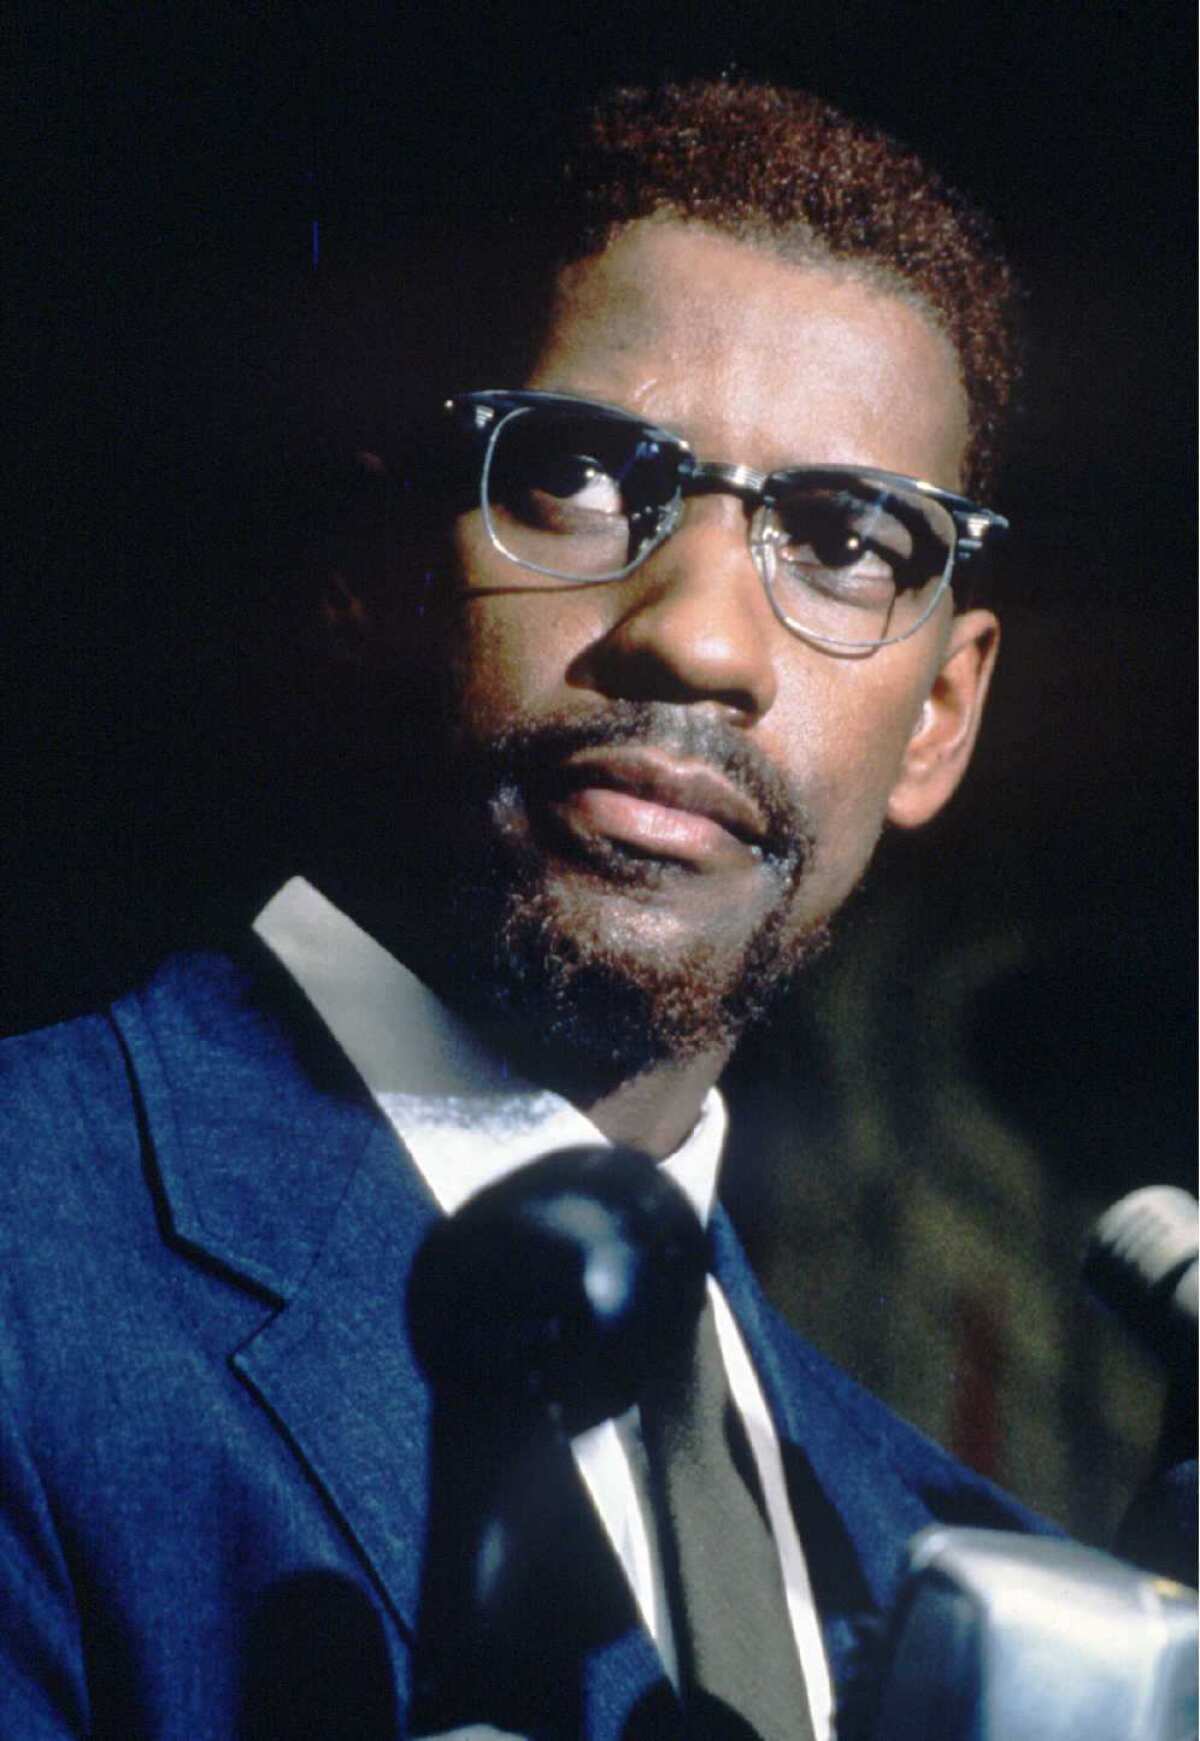 Denzel Washington as the title character in Spike Lee's defining film "Malcolm X."